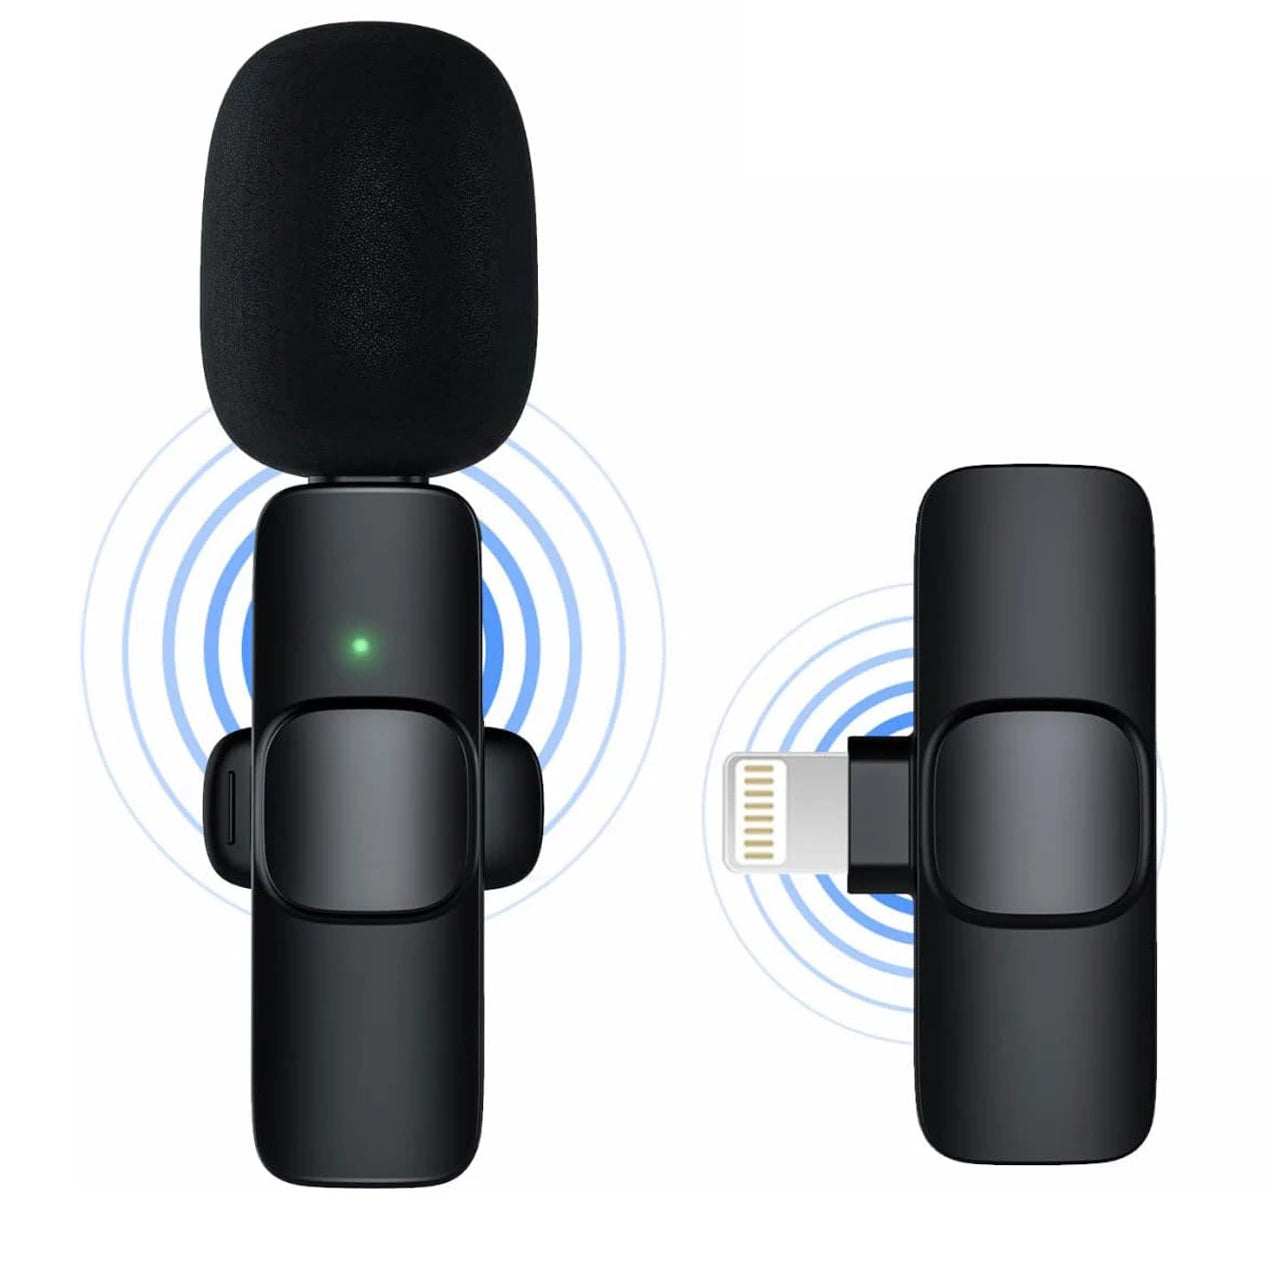 K9 Wireless single Microphone For iPhone/Android